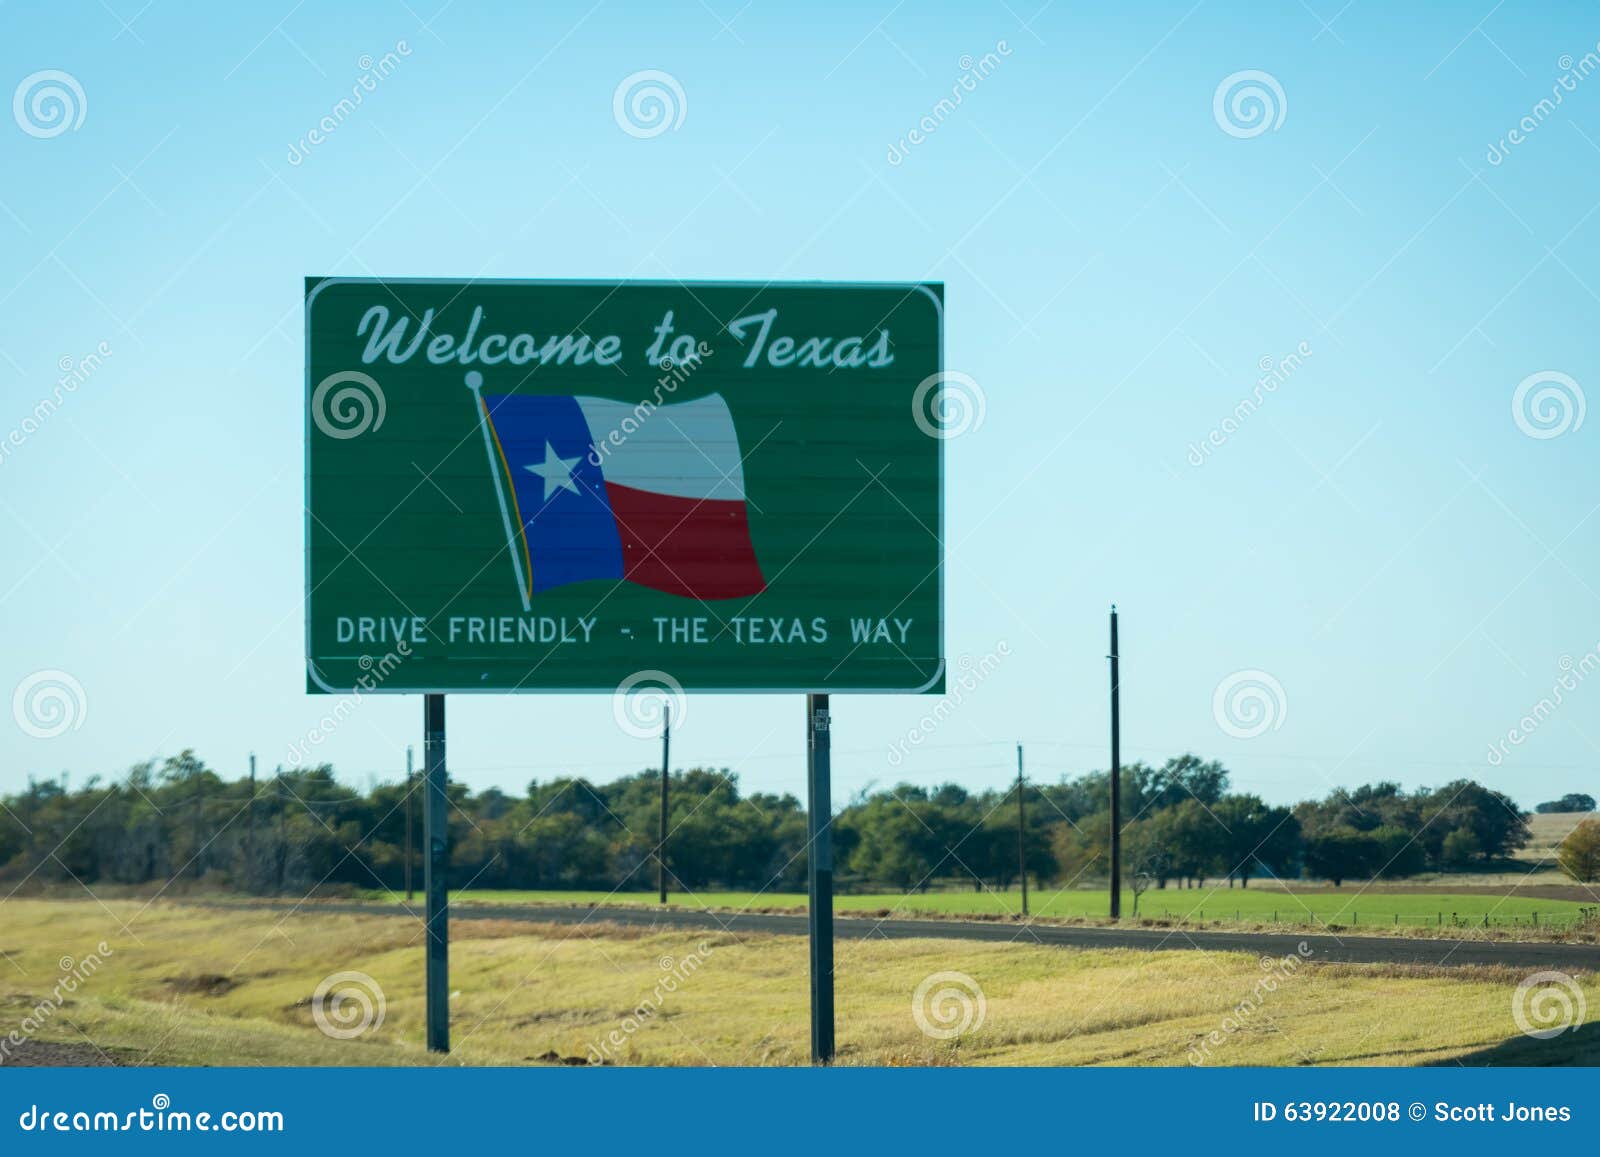 Texas Welcome Stock Photo Image Of Post Tourist Road 63922008